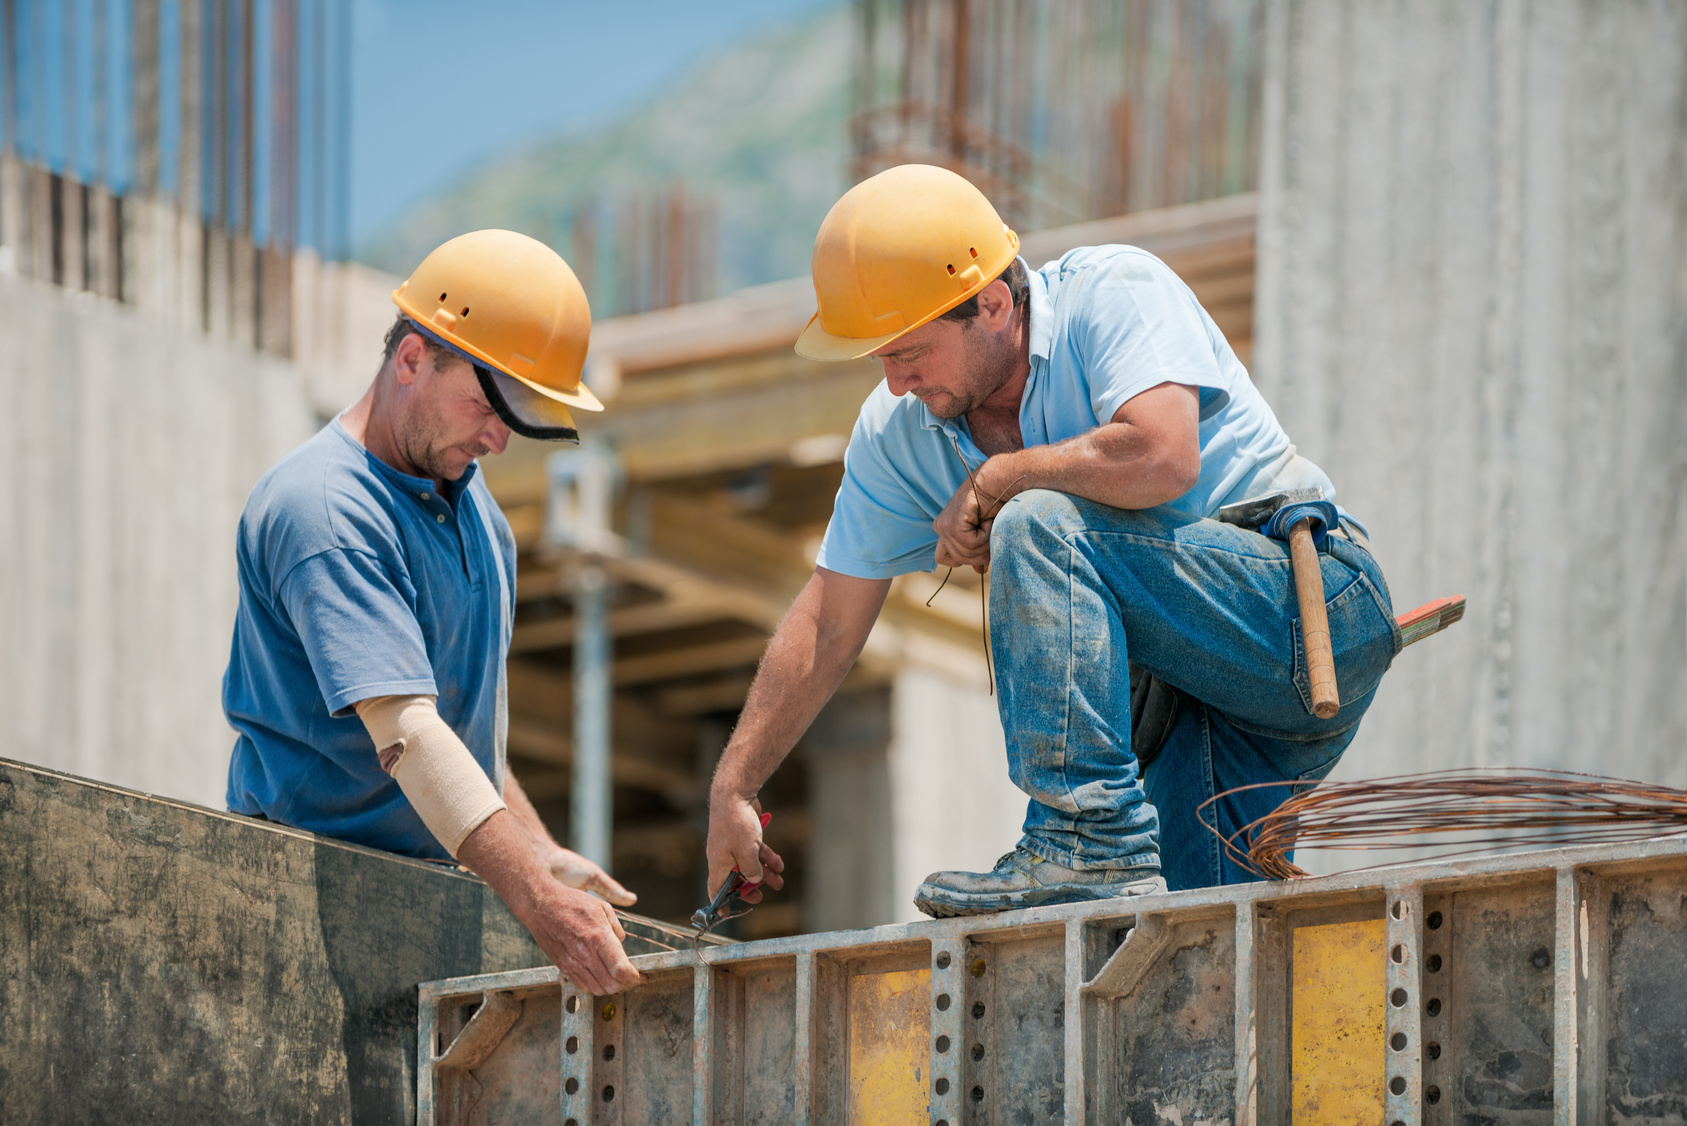 two construction workers installing concrete formwork frames